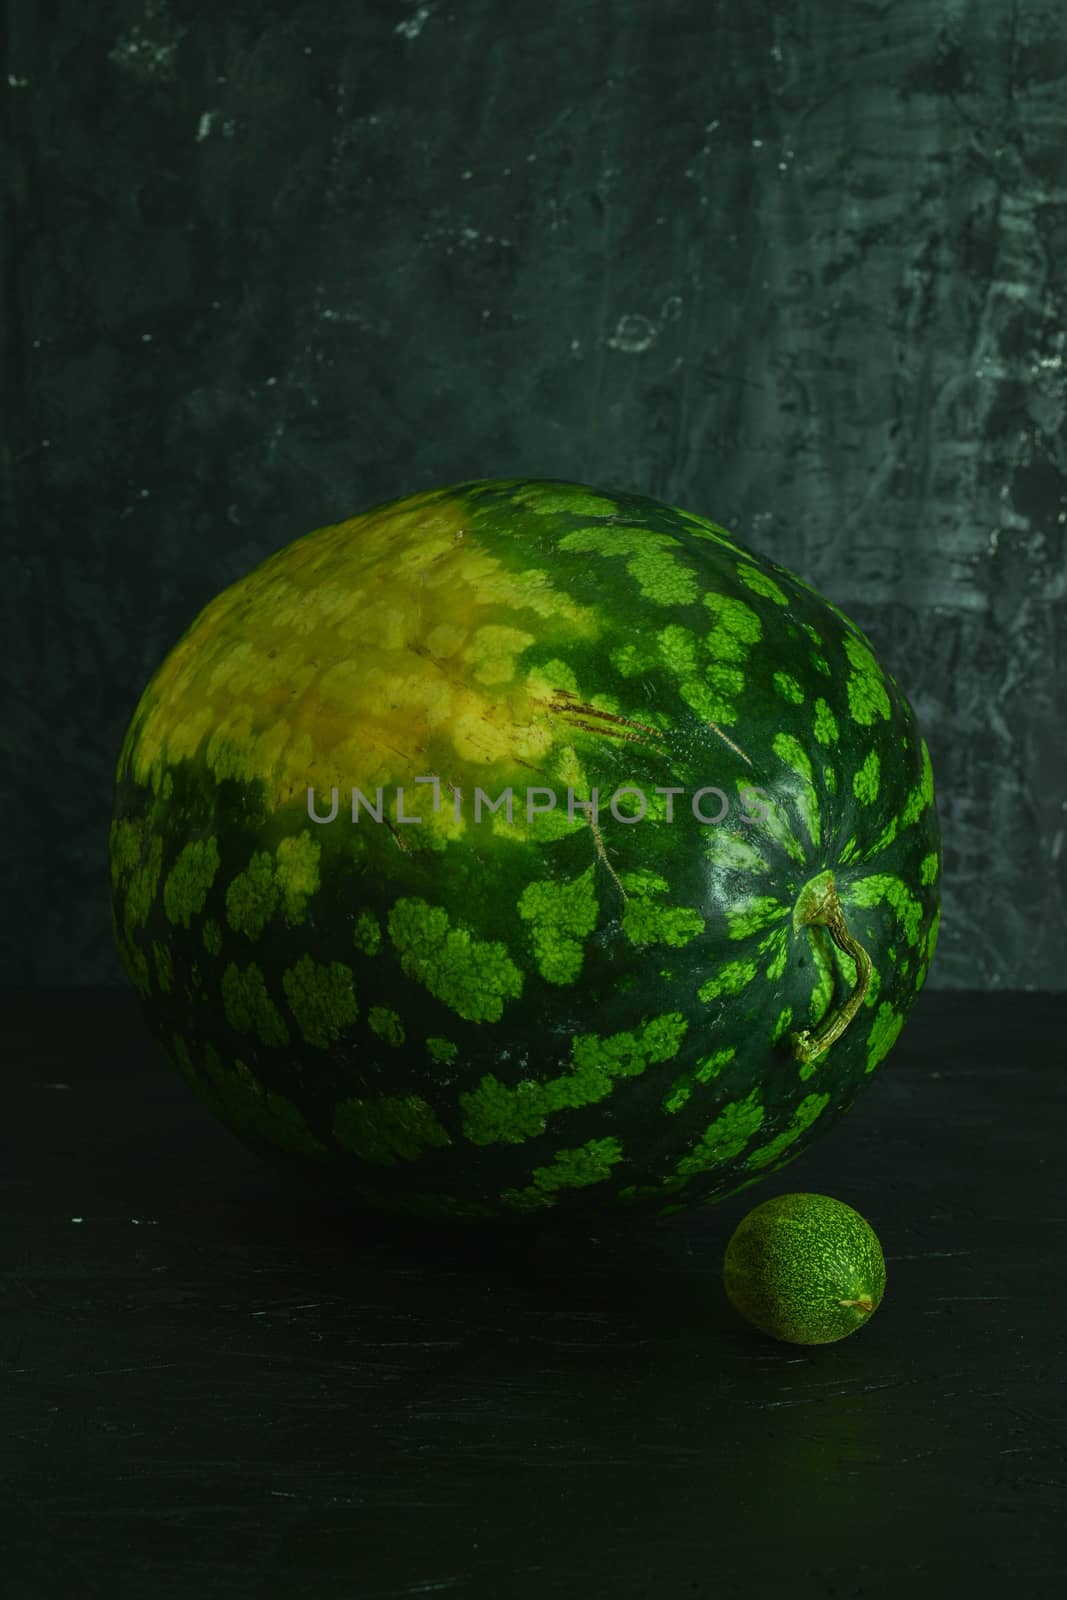 A whole big watermelon on a black table background by sashokddt